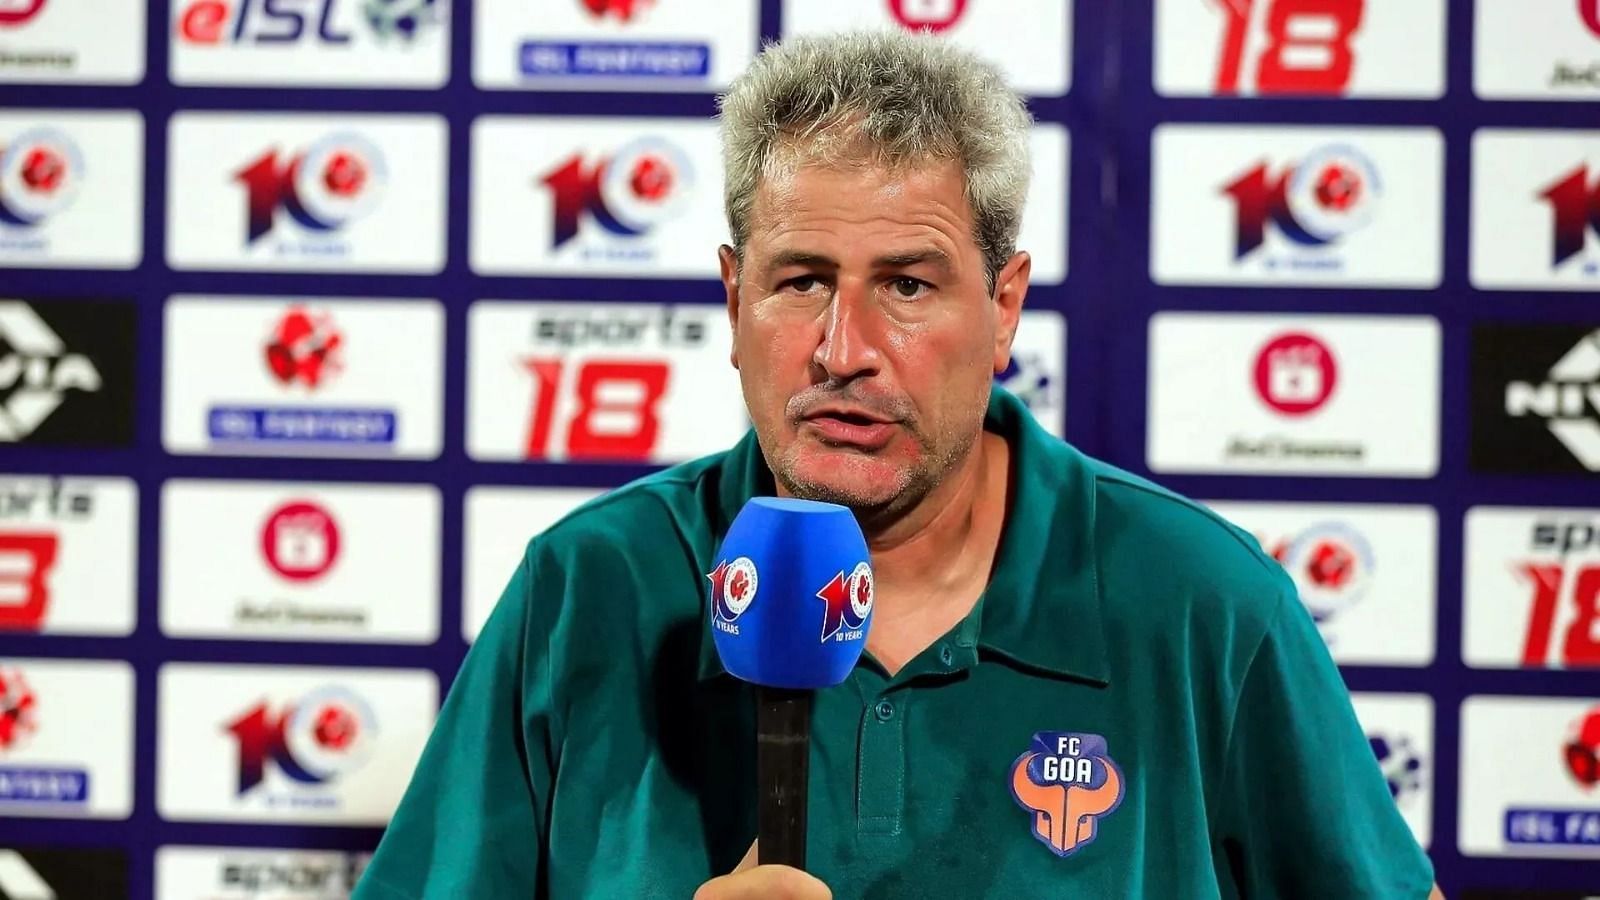 FC Goa head coach Manolo Marquez has stated that his side believes that they are still in the race for this season